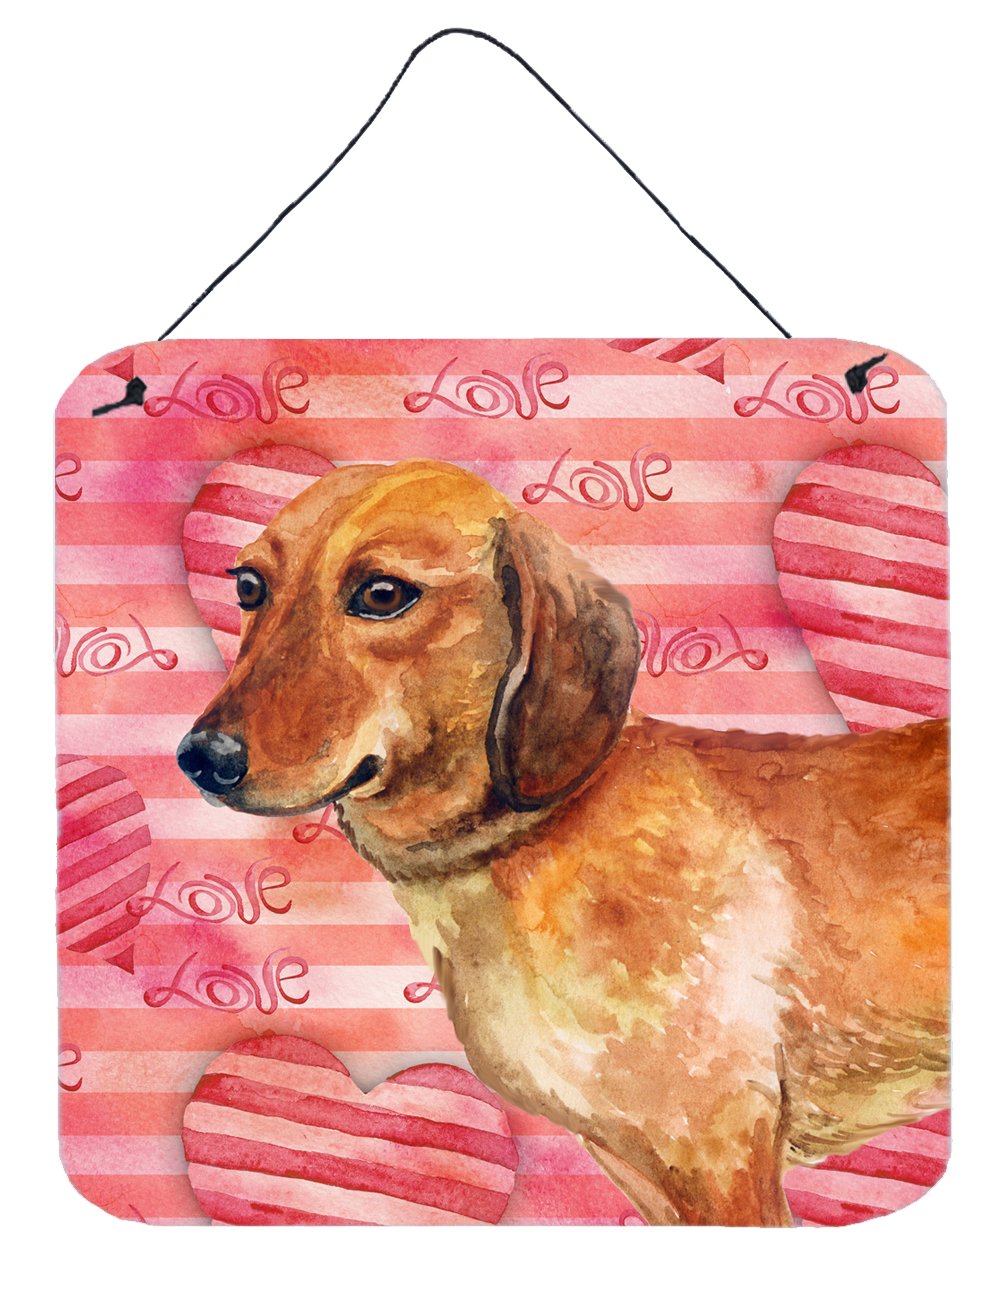 Dachshund Love Wall or Door Hanging Prints BB9739DS66 by Caroline's Treasures